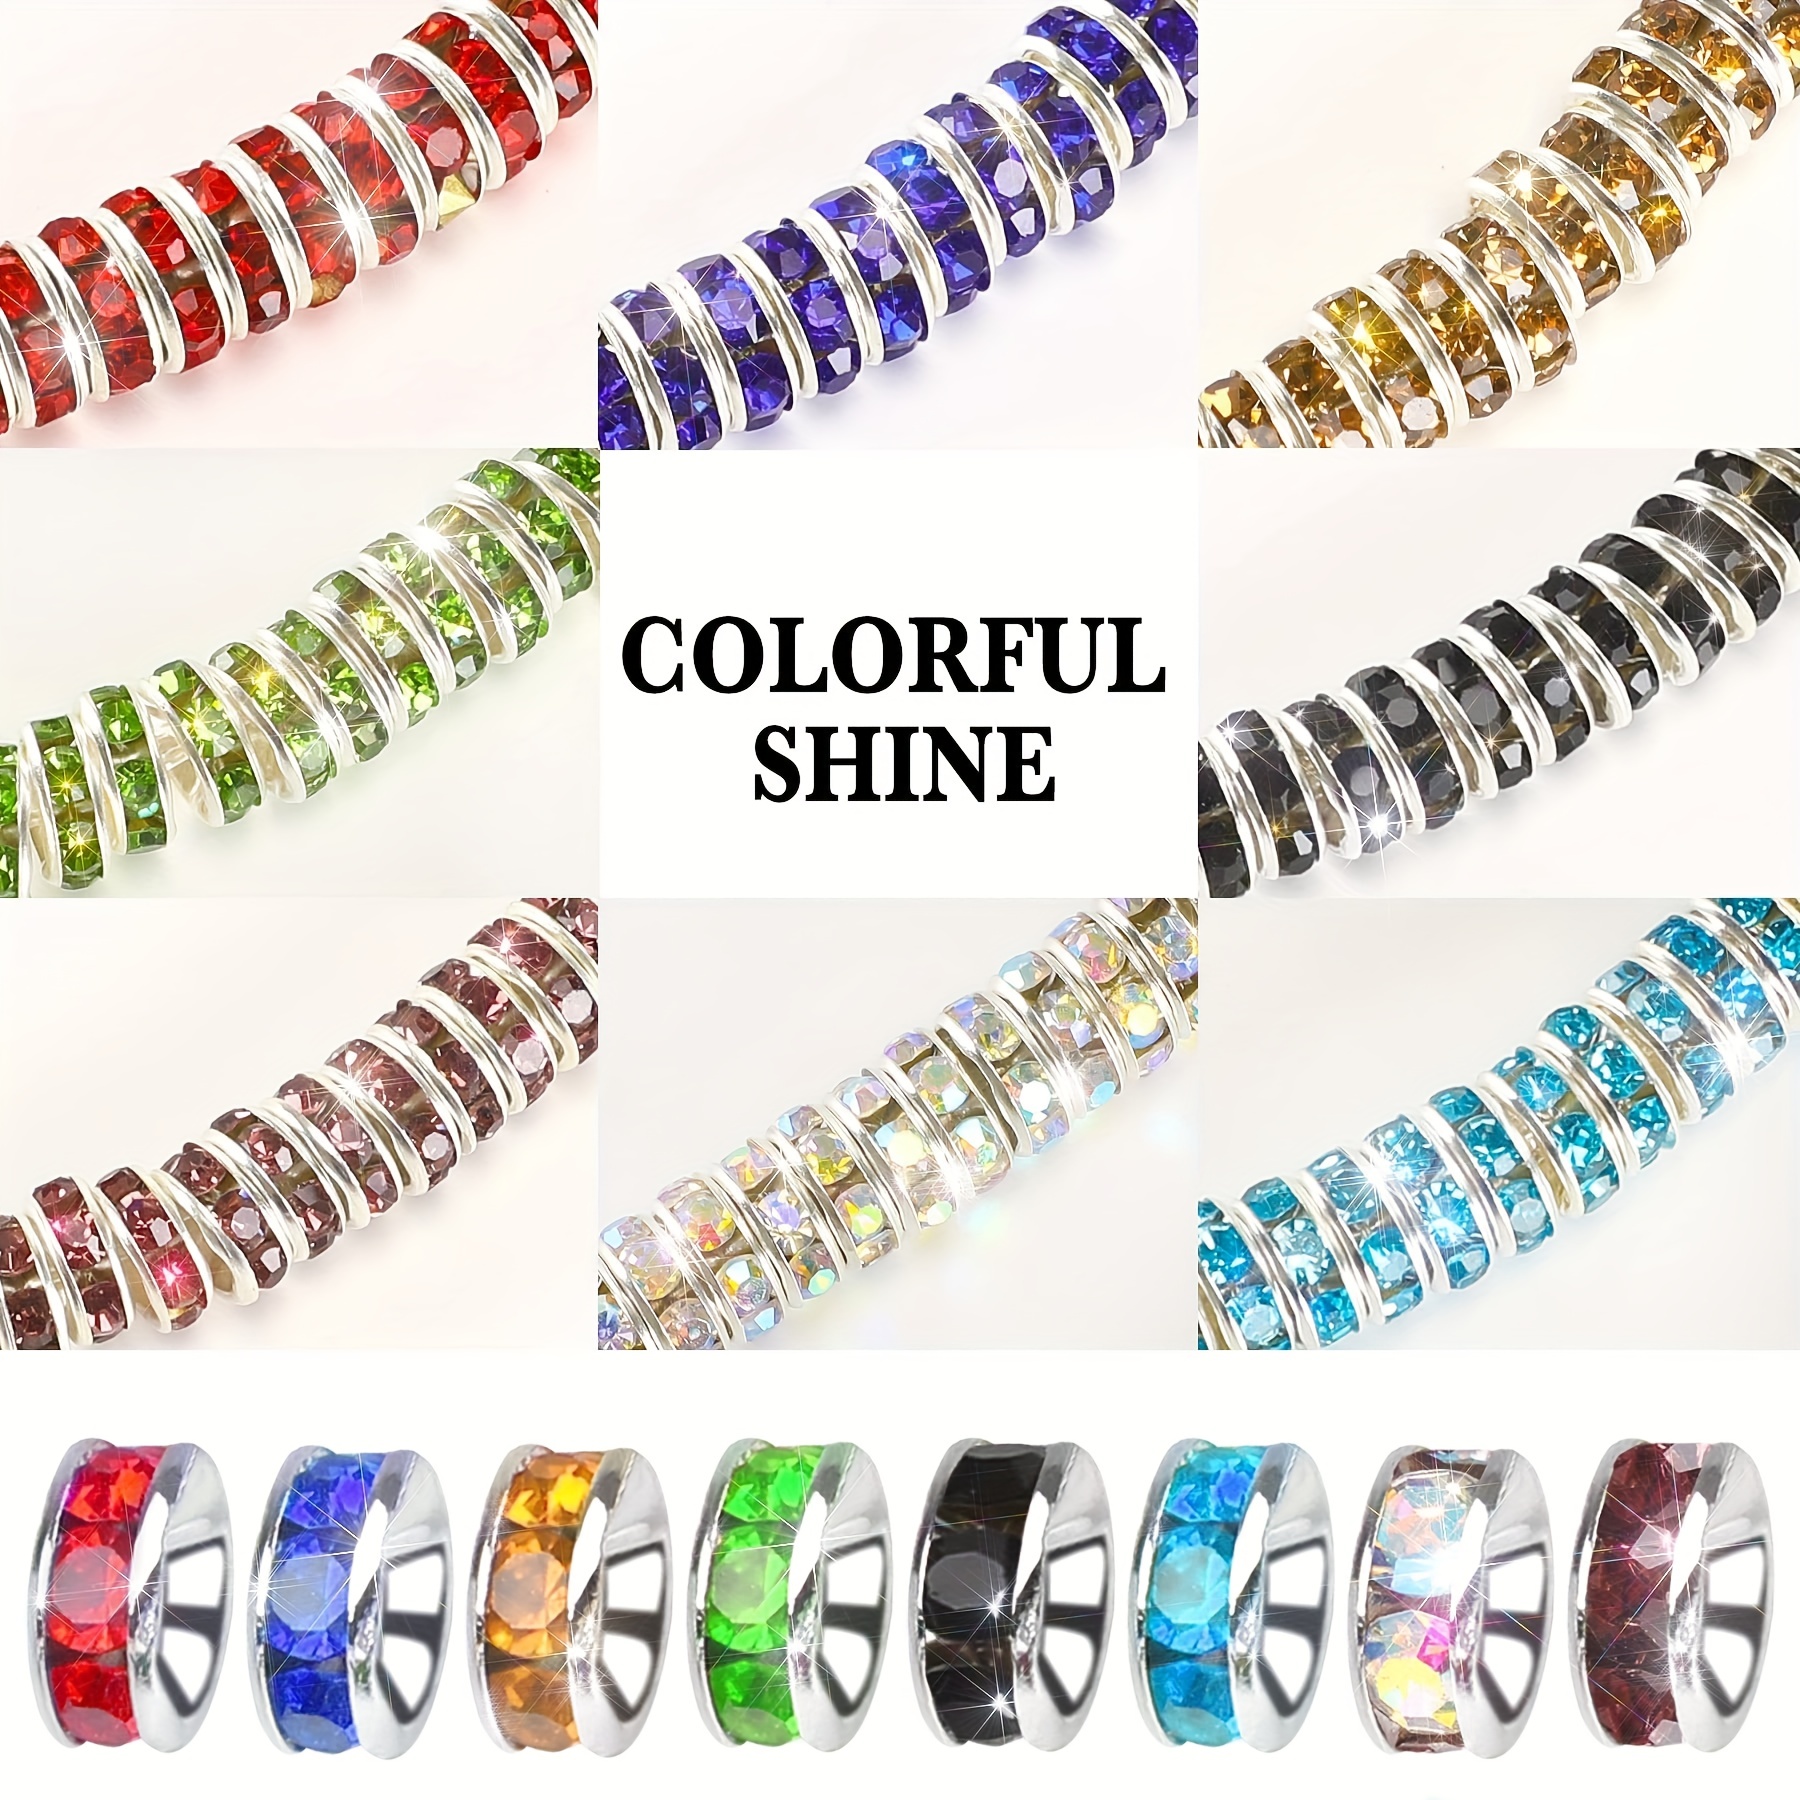 10pcs 15mm Czech Crystal Charm Beads, Crystal Charms for Jewelry Making,  Big Holerondelle Spacer Beads for European Charm Bracelet 26 Colors 